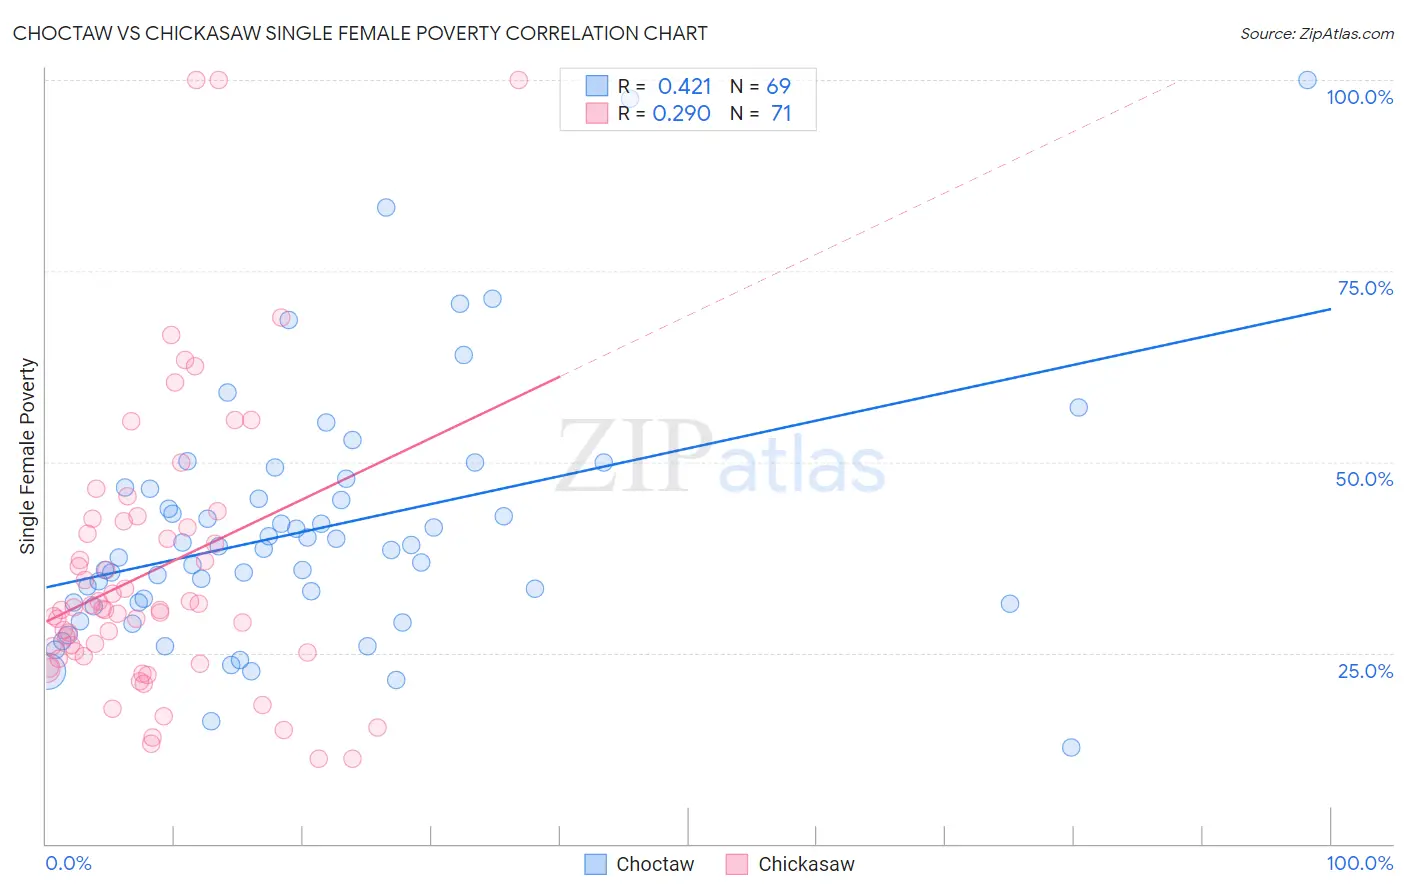 Choctaw vs Chickasaw Single Female Poverty